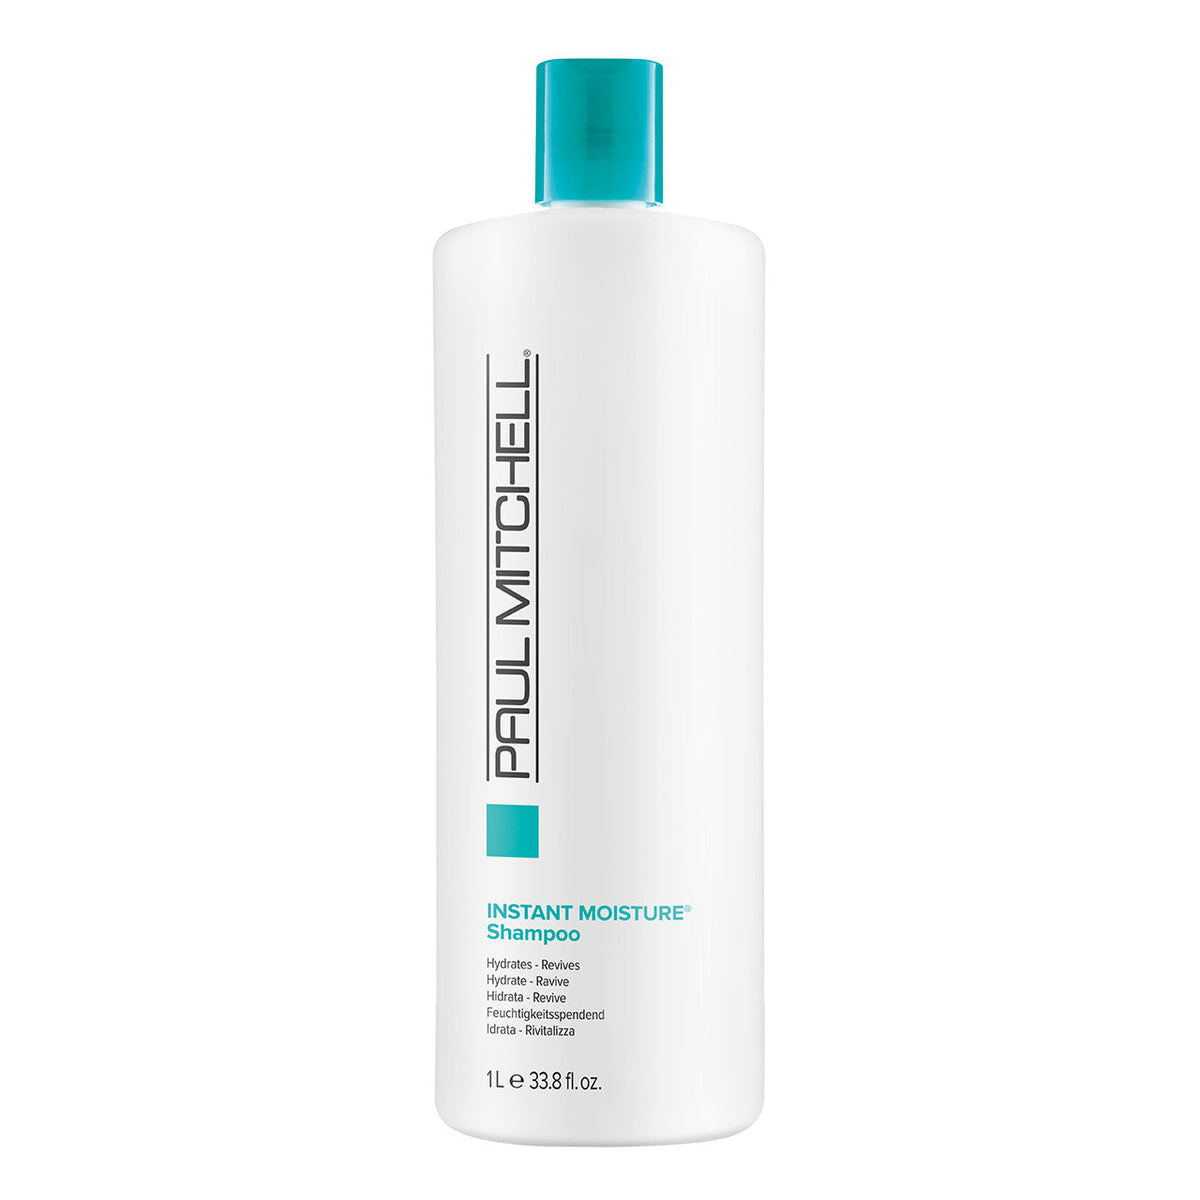 Instant Moisture Shampoo - 1L - by Paul Mitchell |ProCare Outlet|